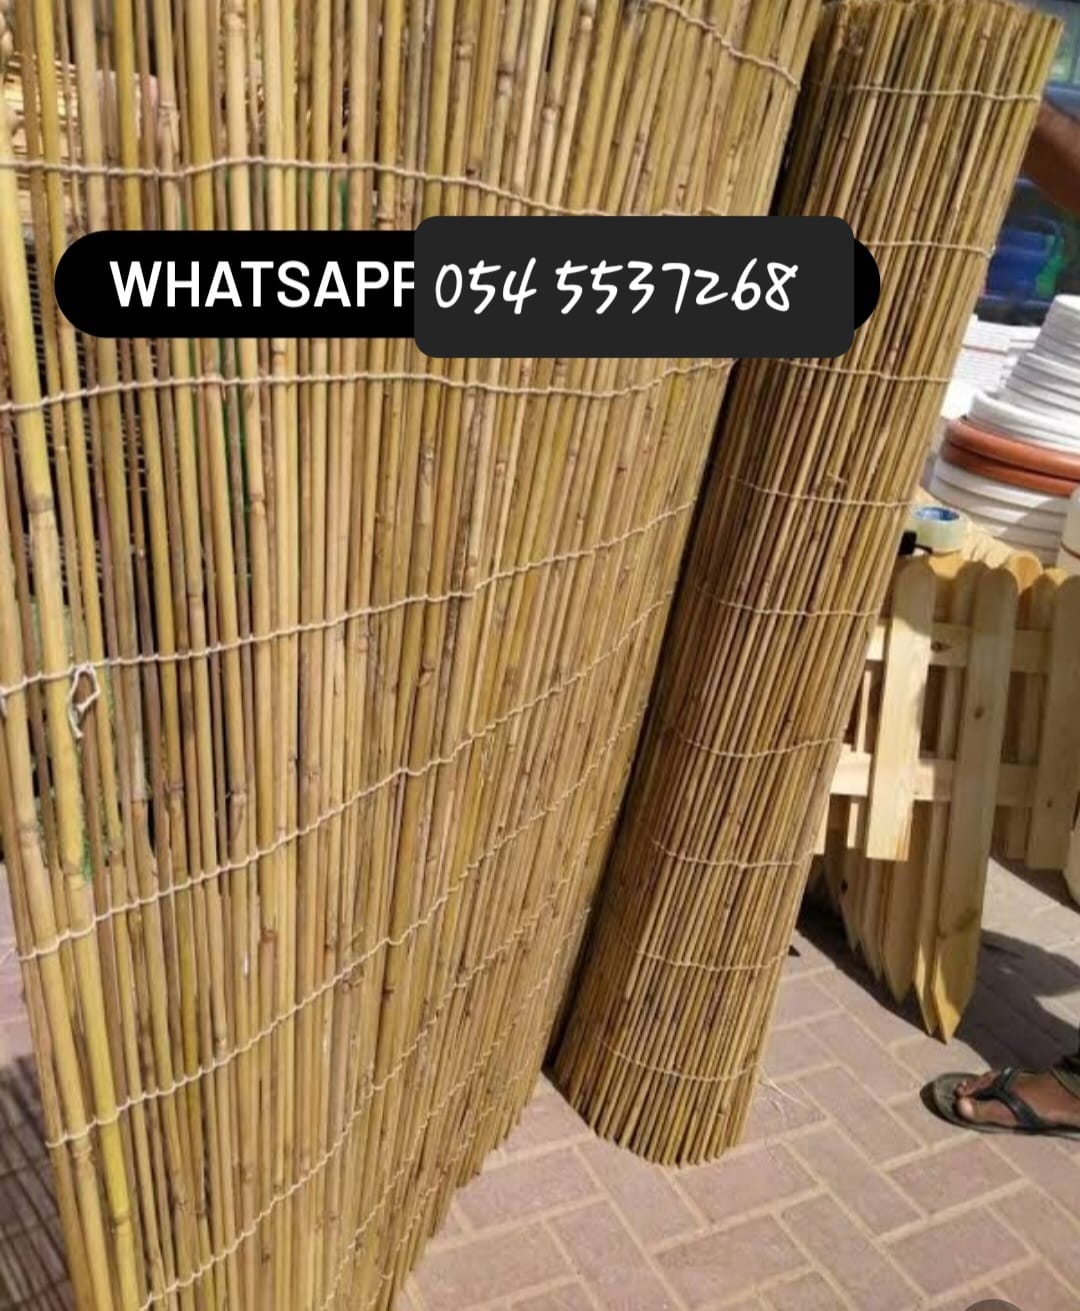 Bamboo Fence Panel+971545537268